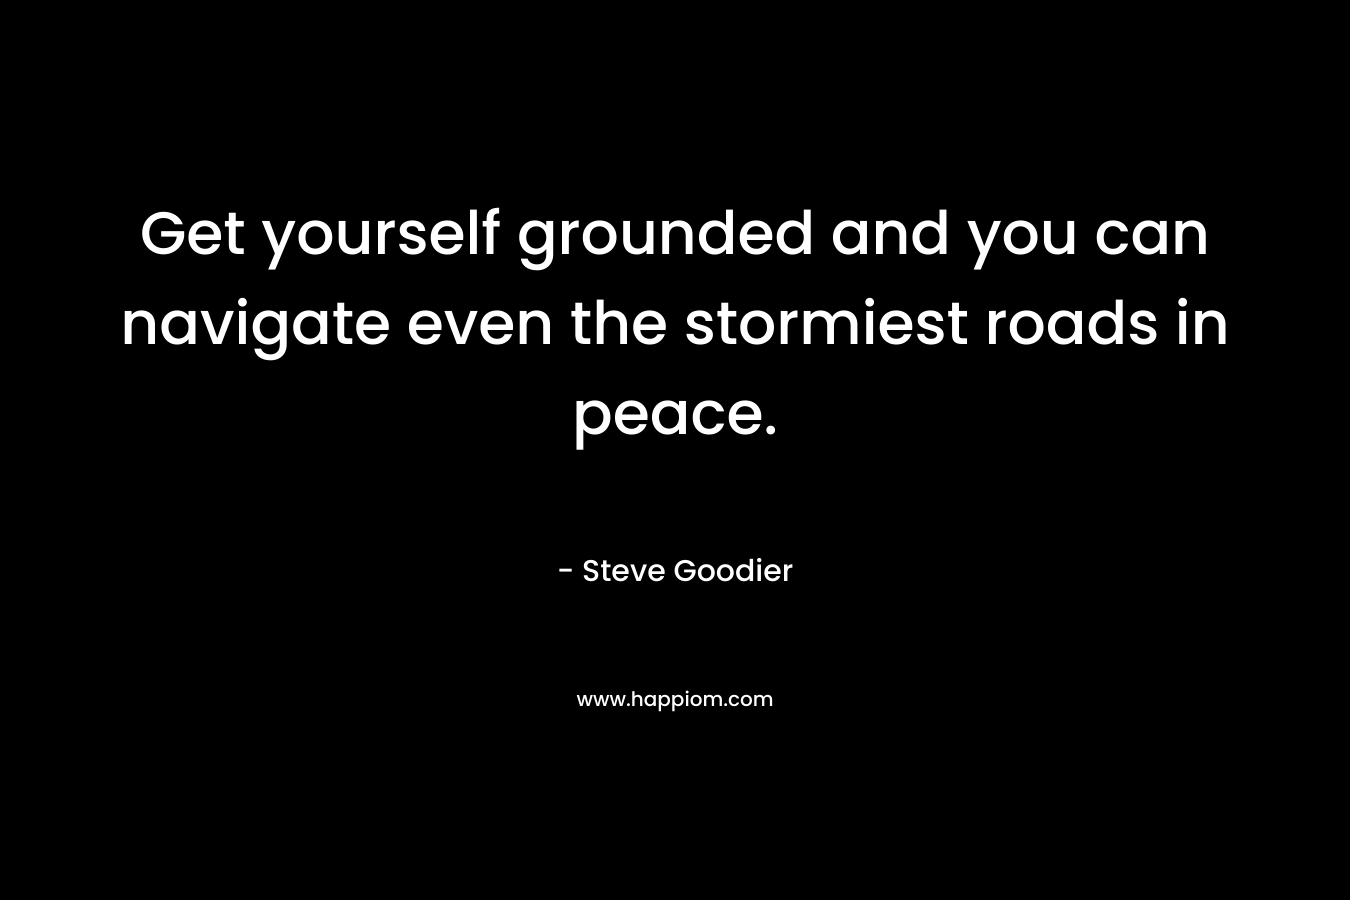 Get yourself grounded and you can navigate even the stormiest roads in peace.